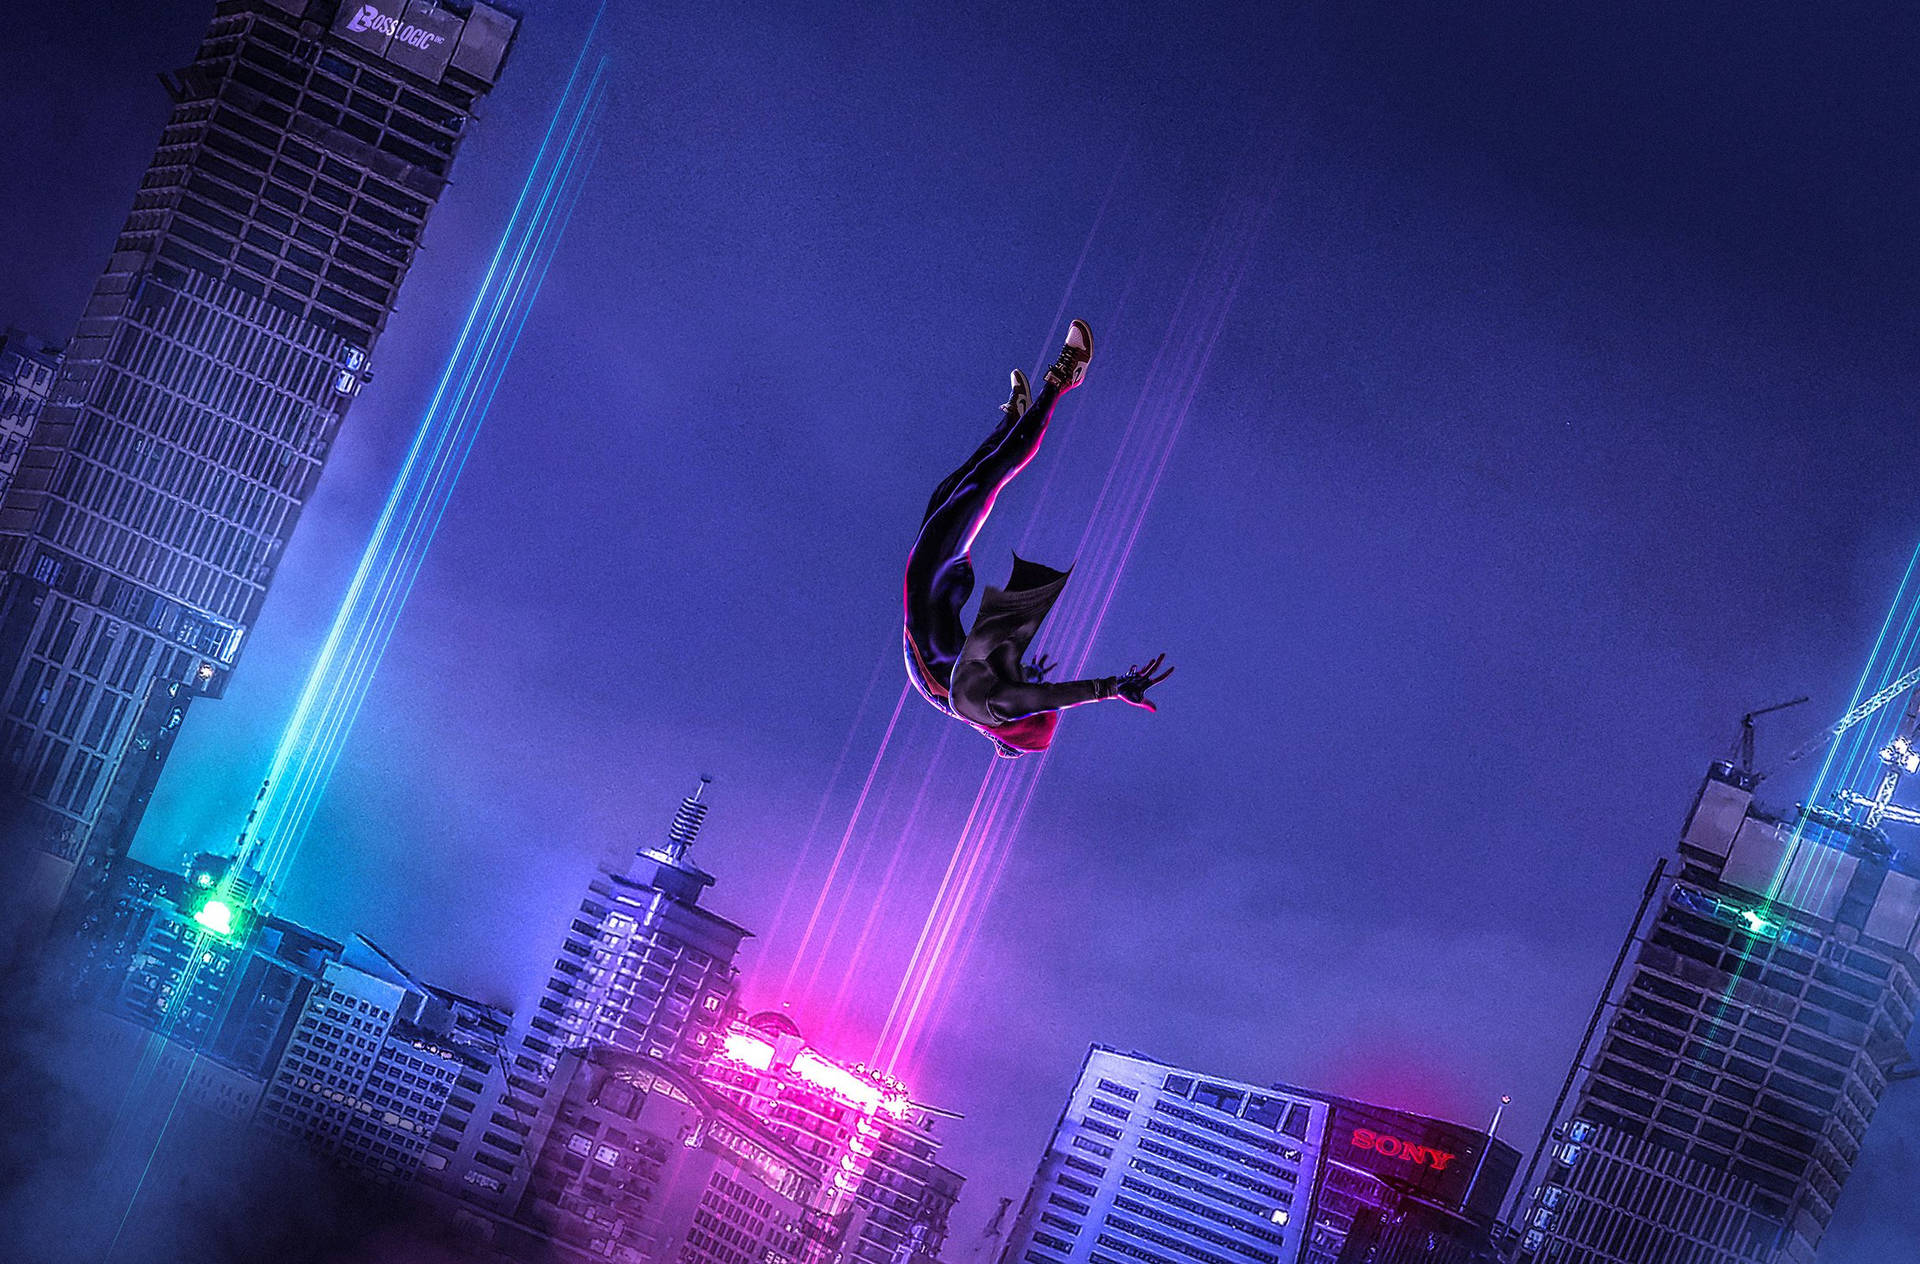 Free Spider Man Into The Spider Verse Wallpaper Downloads, [100+] Spider Man  Into The Spider Verse Wallpapers for FREE 